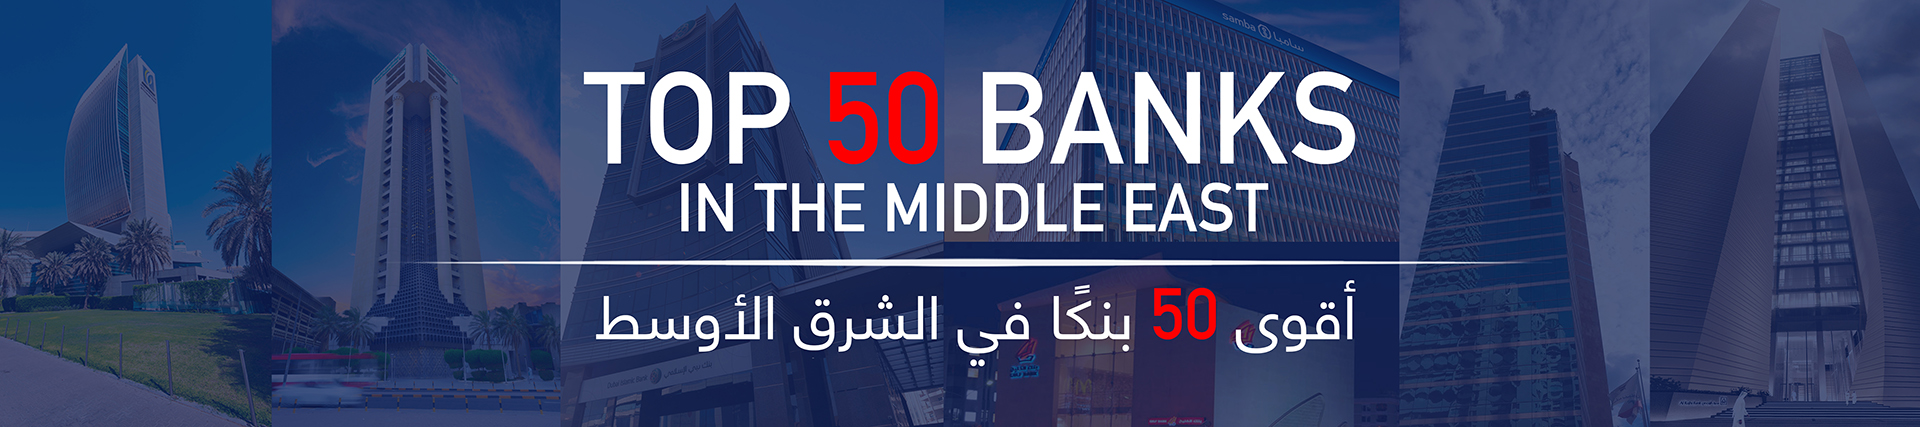 Top 50 Banks In The Middle East 2019